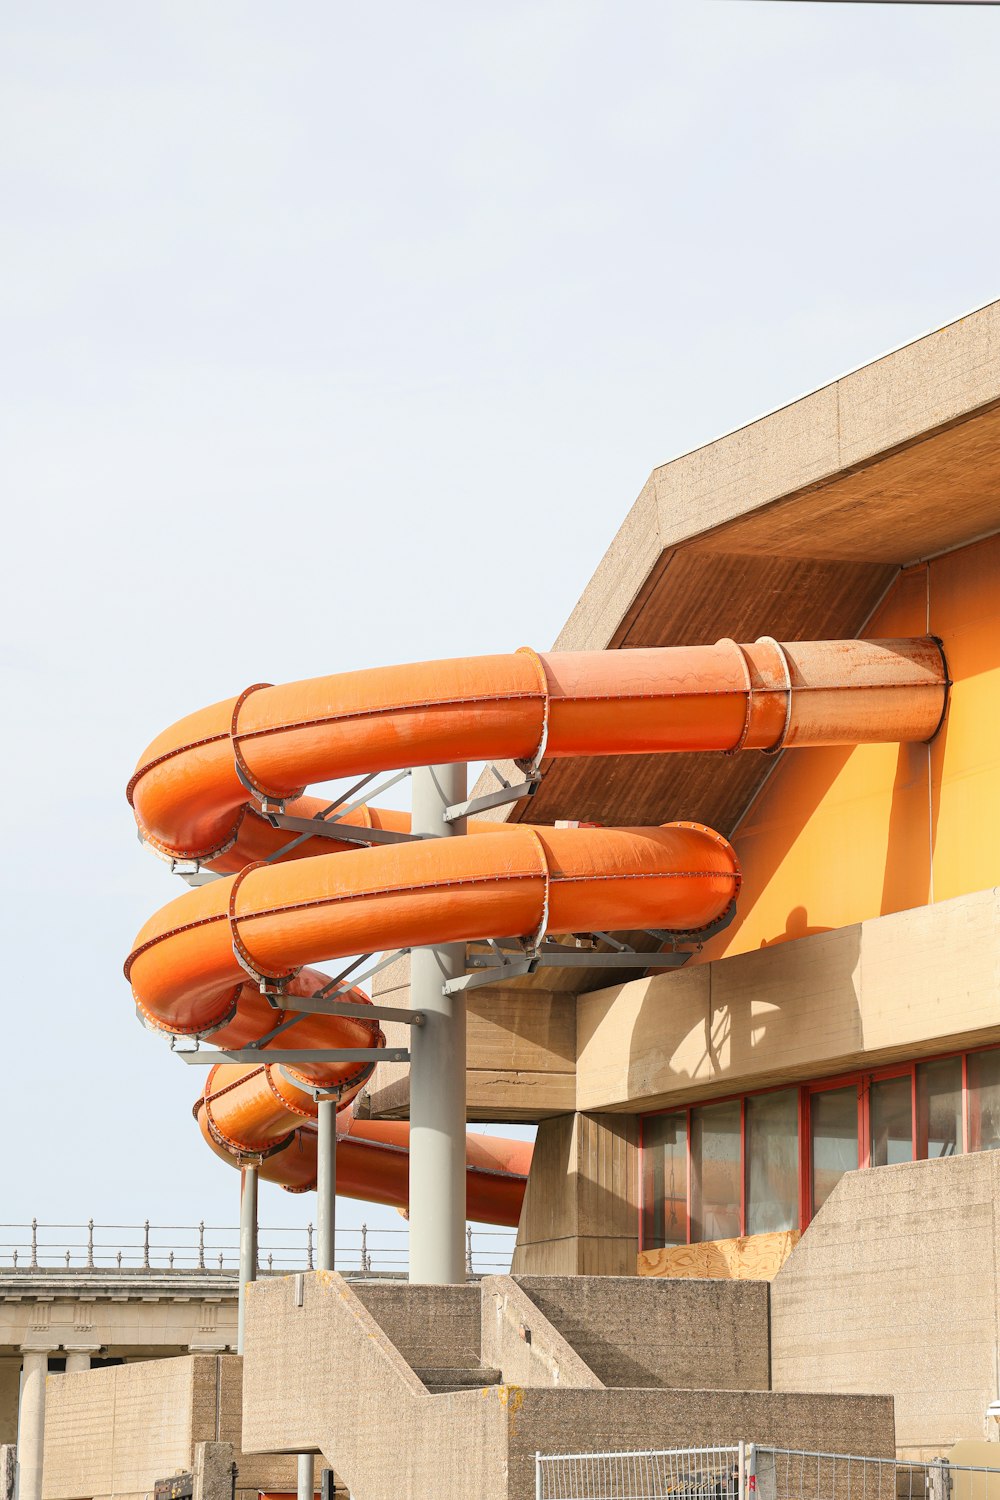 a row of orange water slides in front of a building